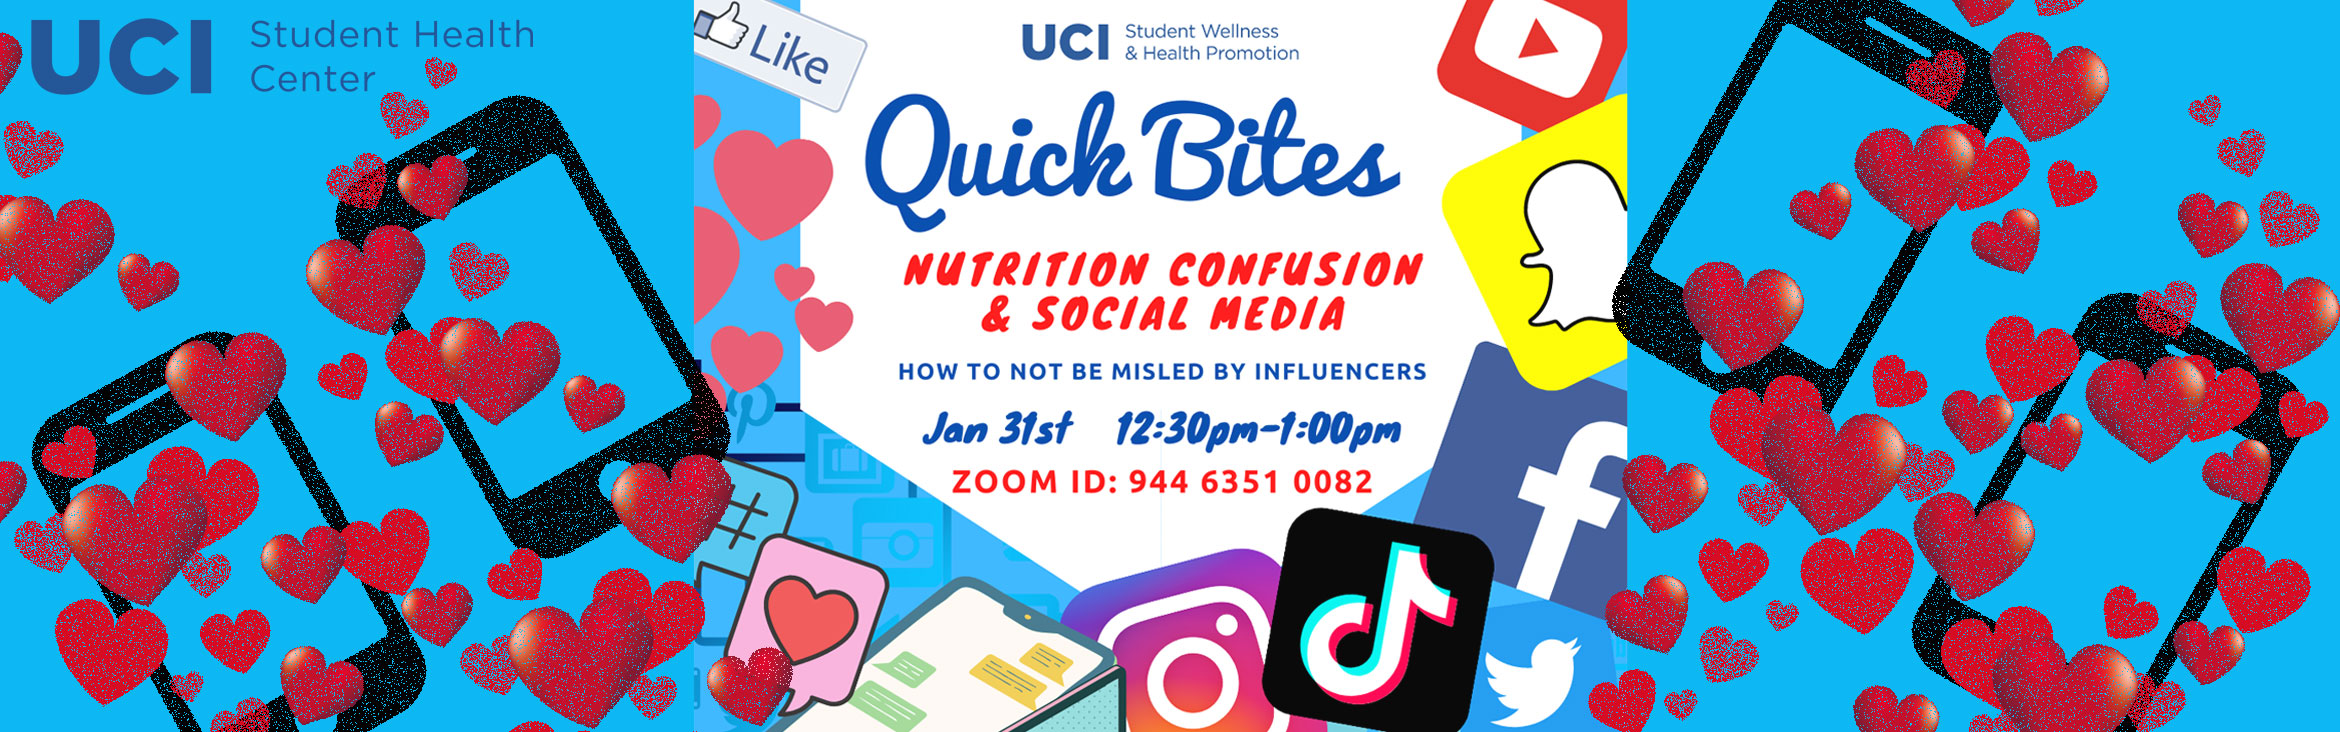 Quick Bites, Nutrition Confusion and Social Media 